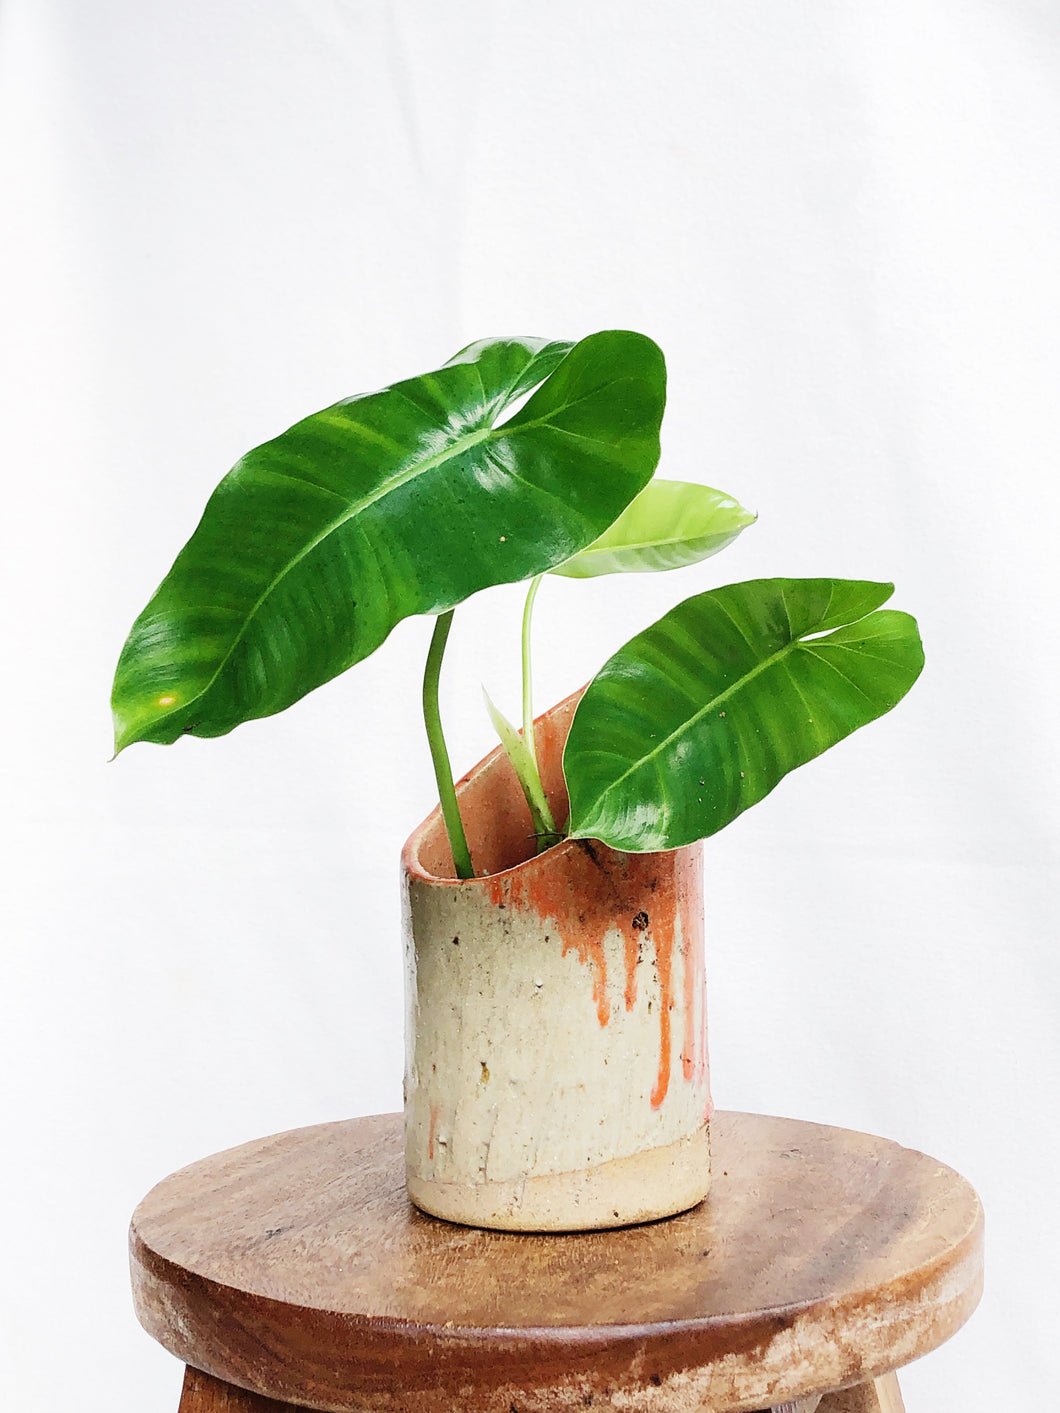 PHILODENDRON BURLE MARXII IN CLAY POT